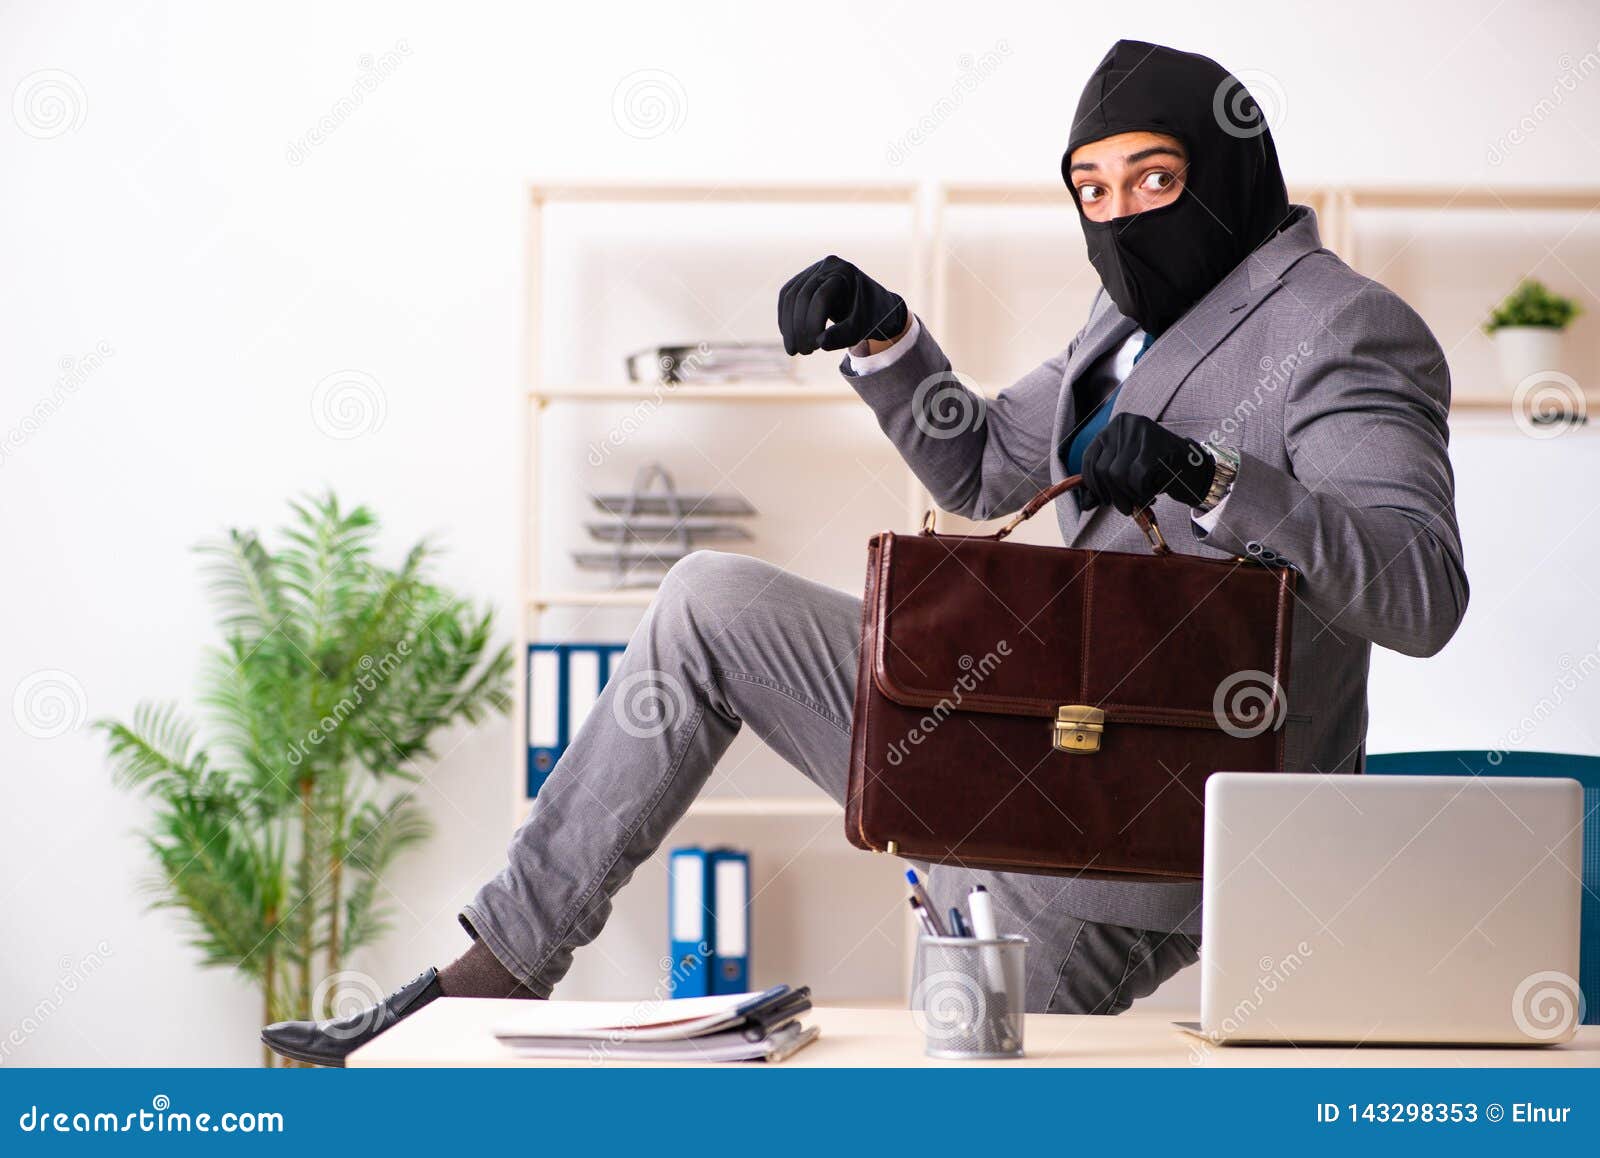 The Male Gangster Stealing Information from the Office Stock Image - Image  of criminal, disguise: 143298353